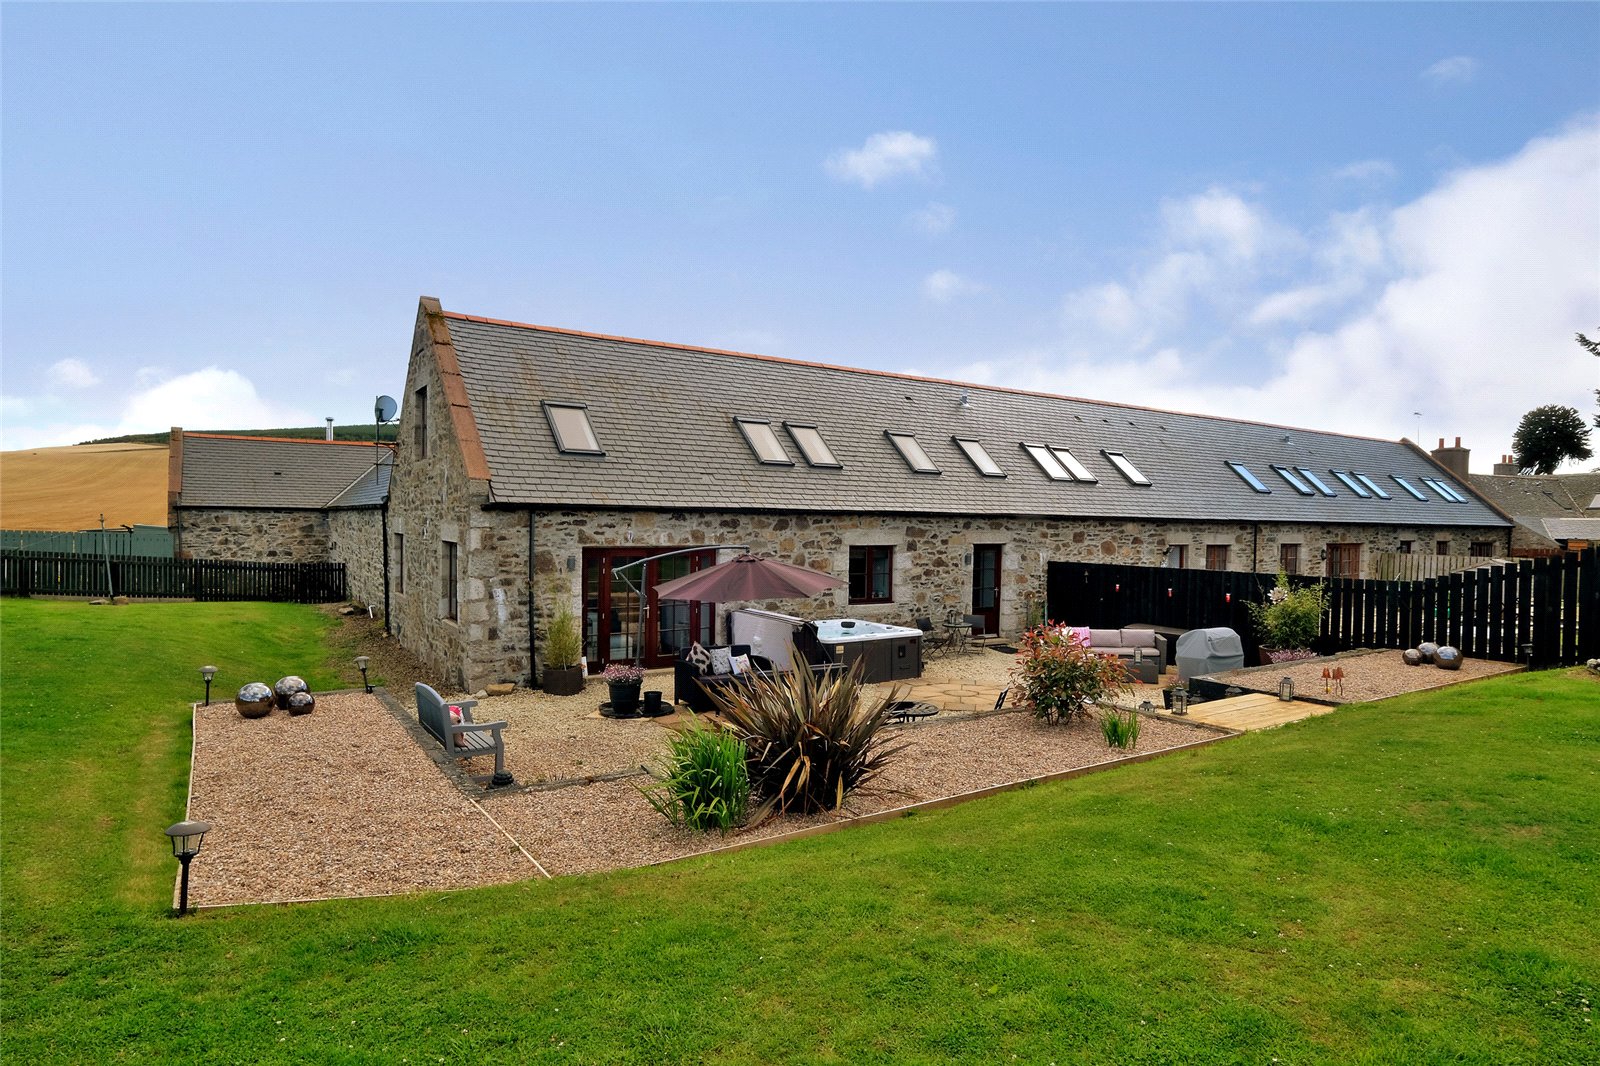 Stylish converted steading with views for miles